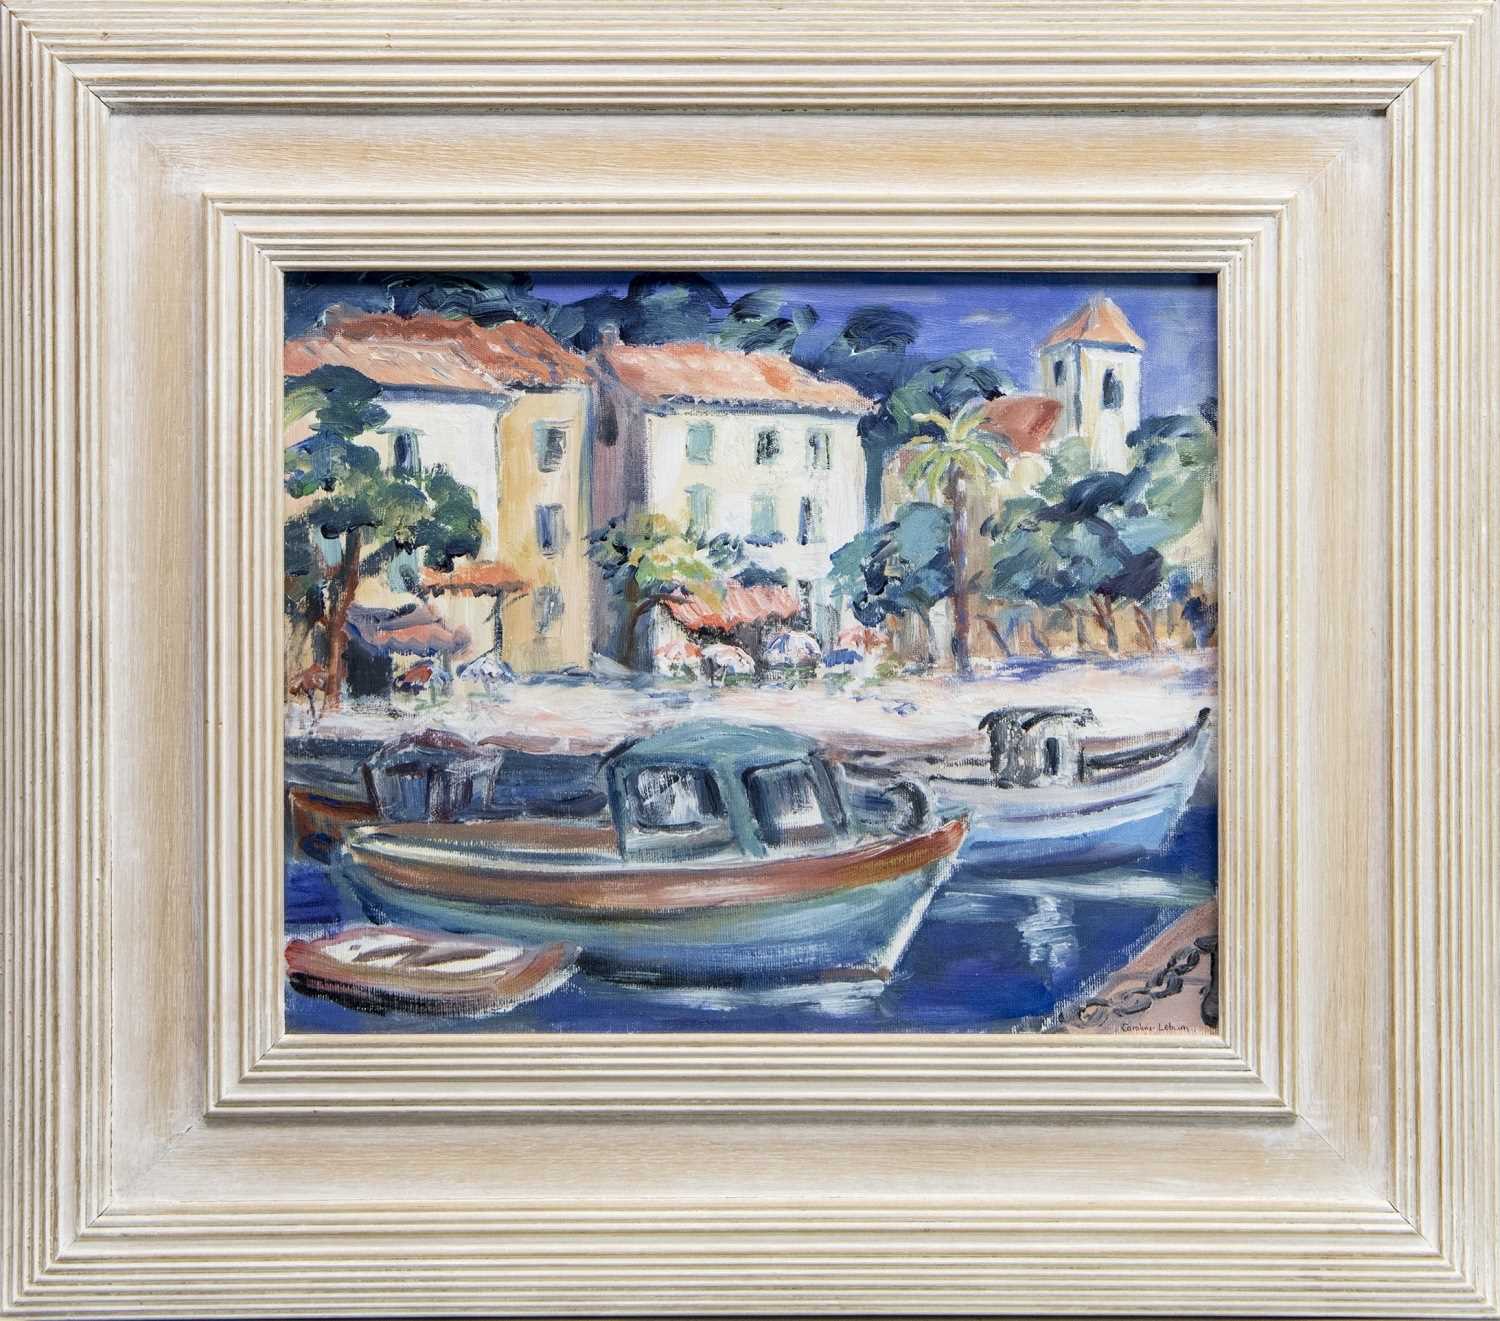 Lot 512 - BOATS AT A CONTINENTAL HARBOUR, AN OIL BY CAROLINE LEBURN